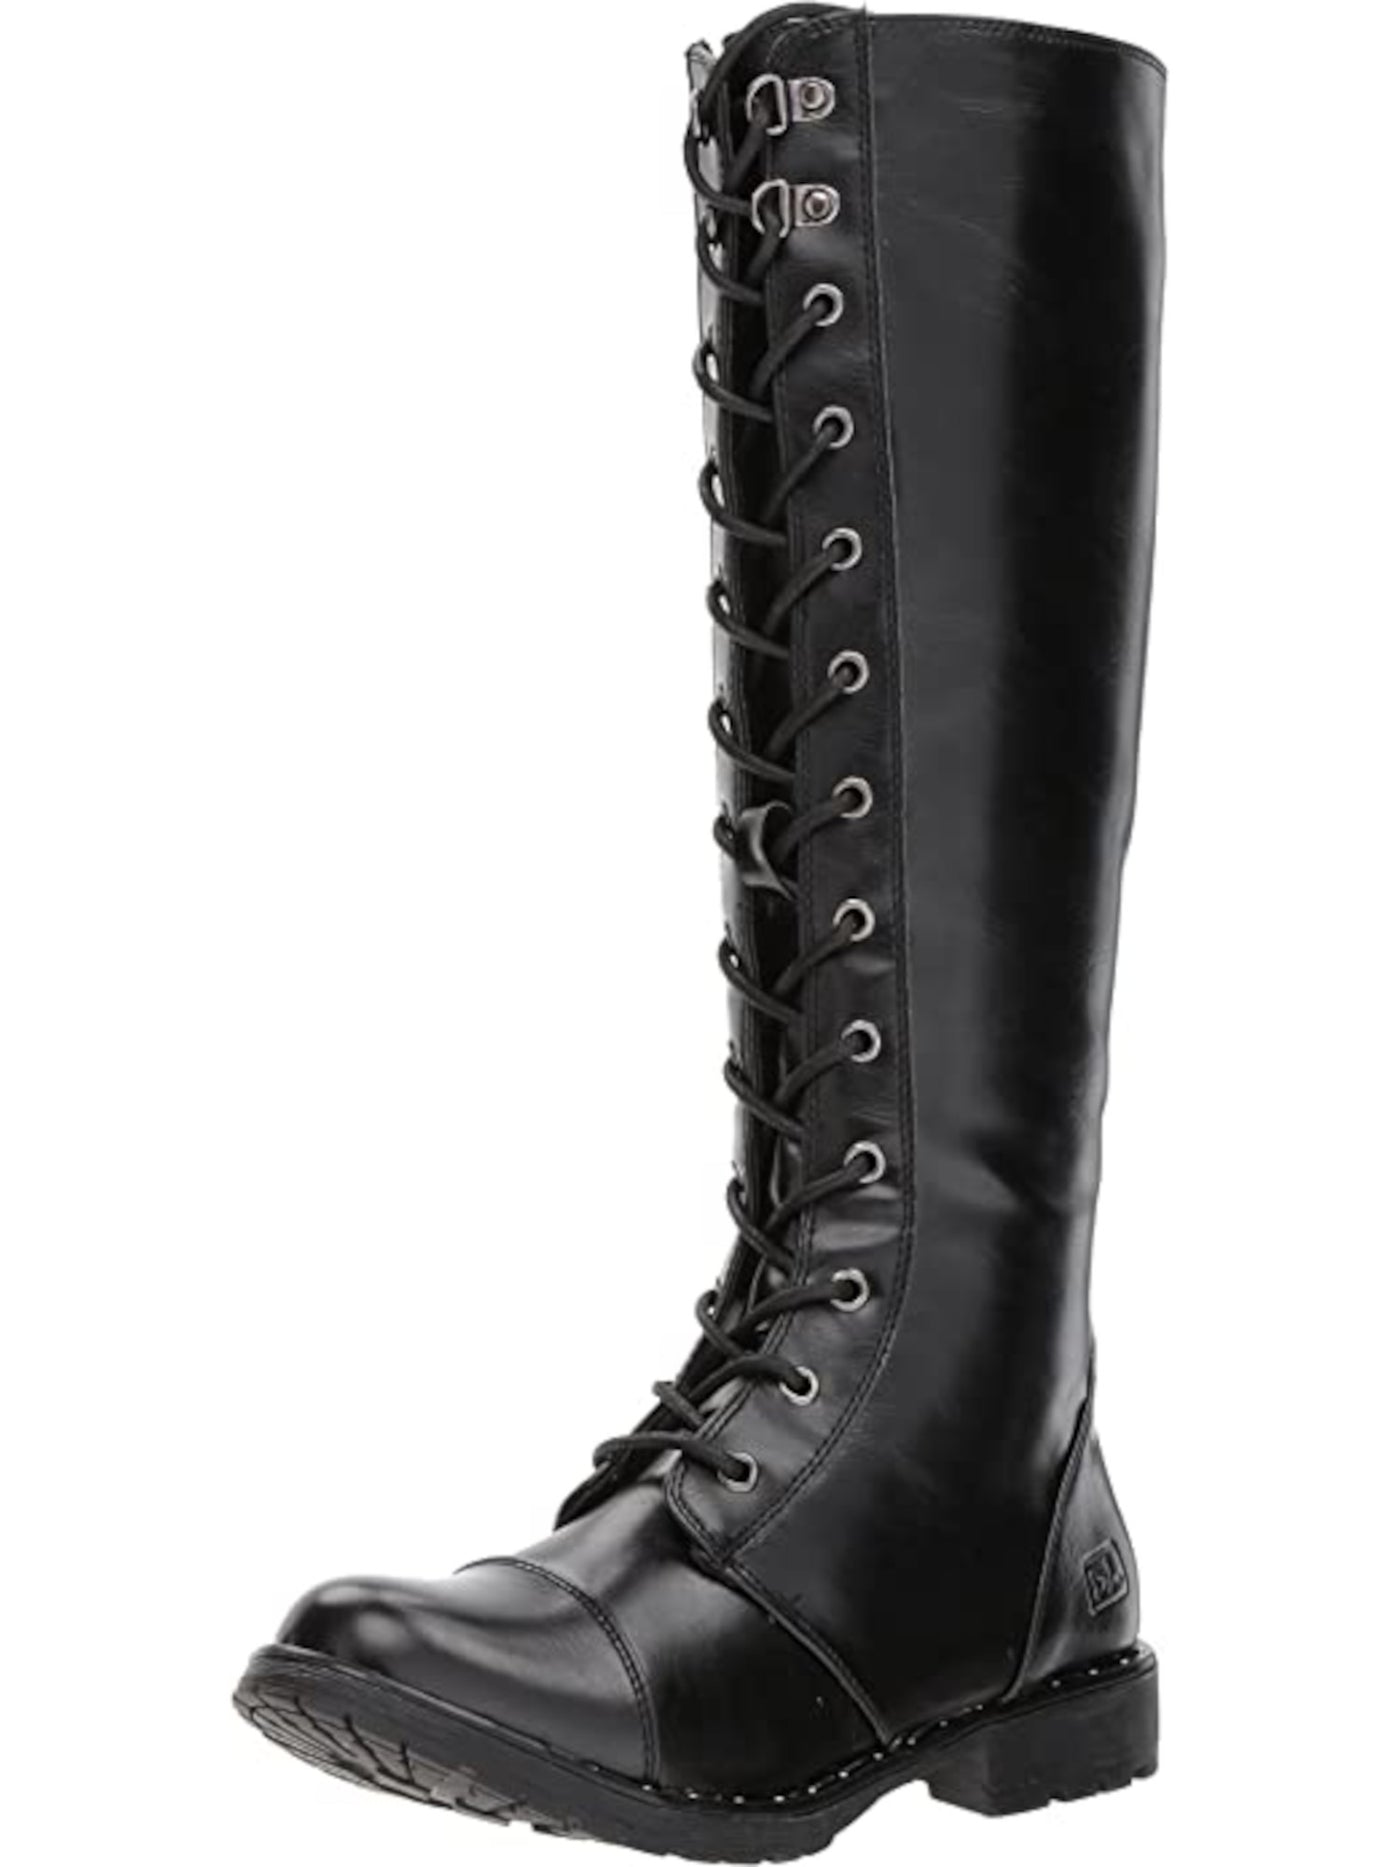 DIRTY LAUNDRY Womens Black Metallic Accents Lace-Up Studded Roset Round Toe Block Heel Zip-Up Combat Boots 5.5 M